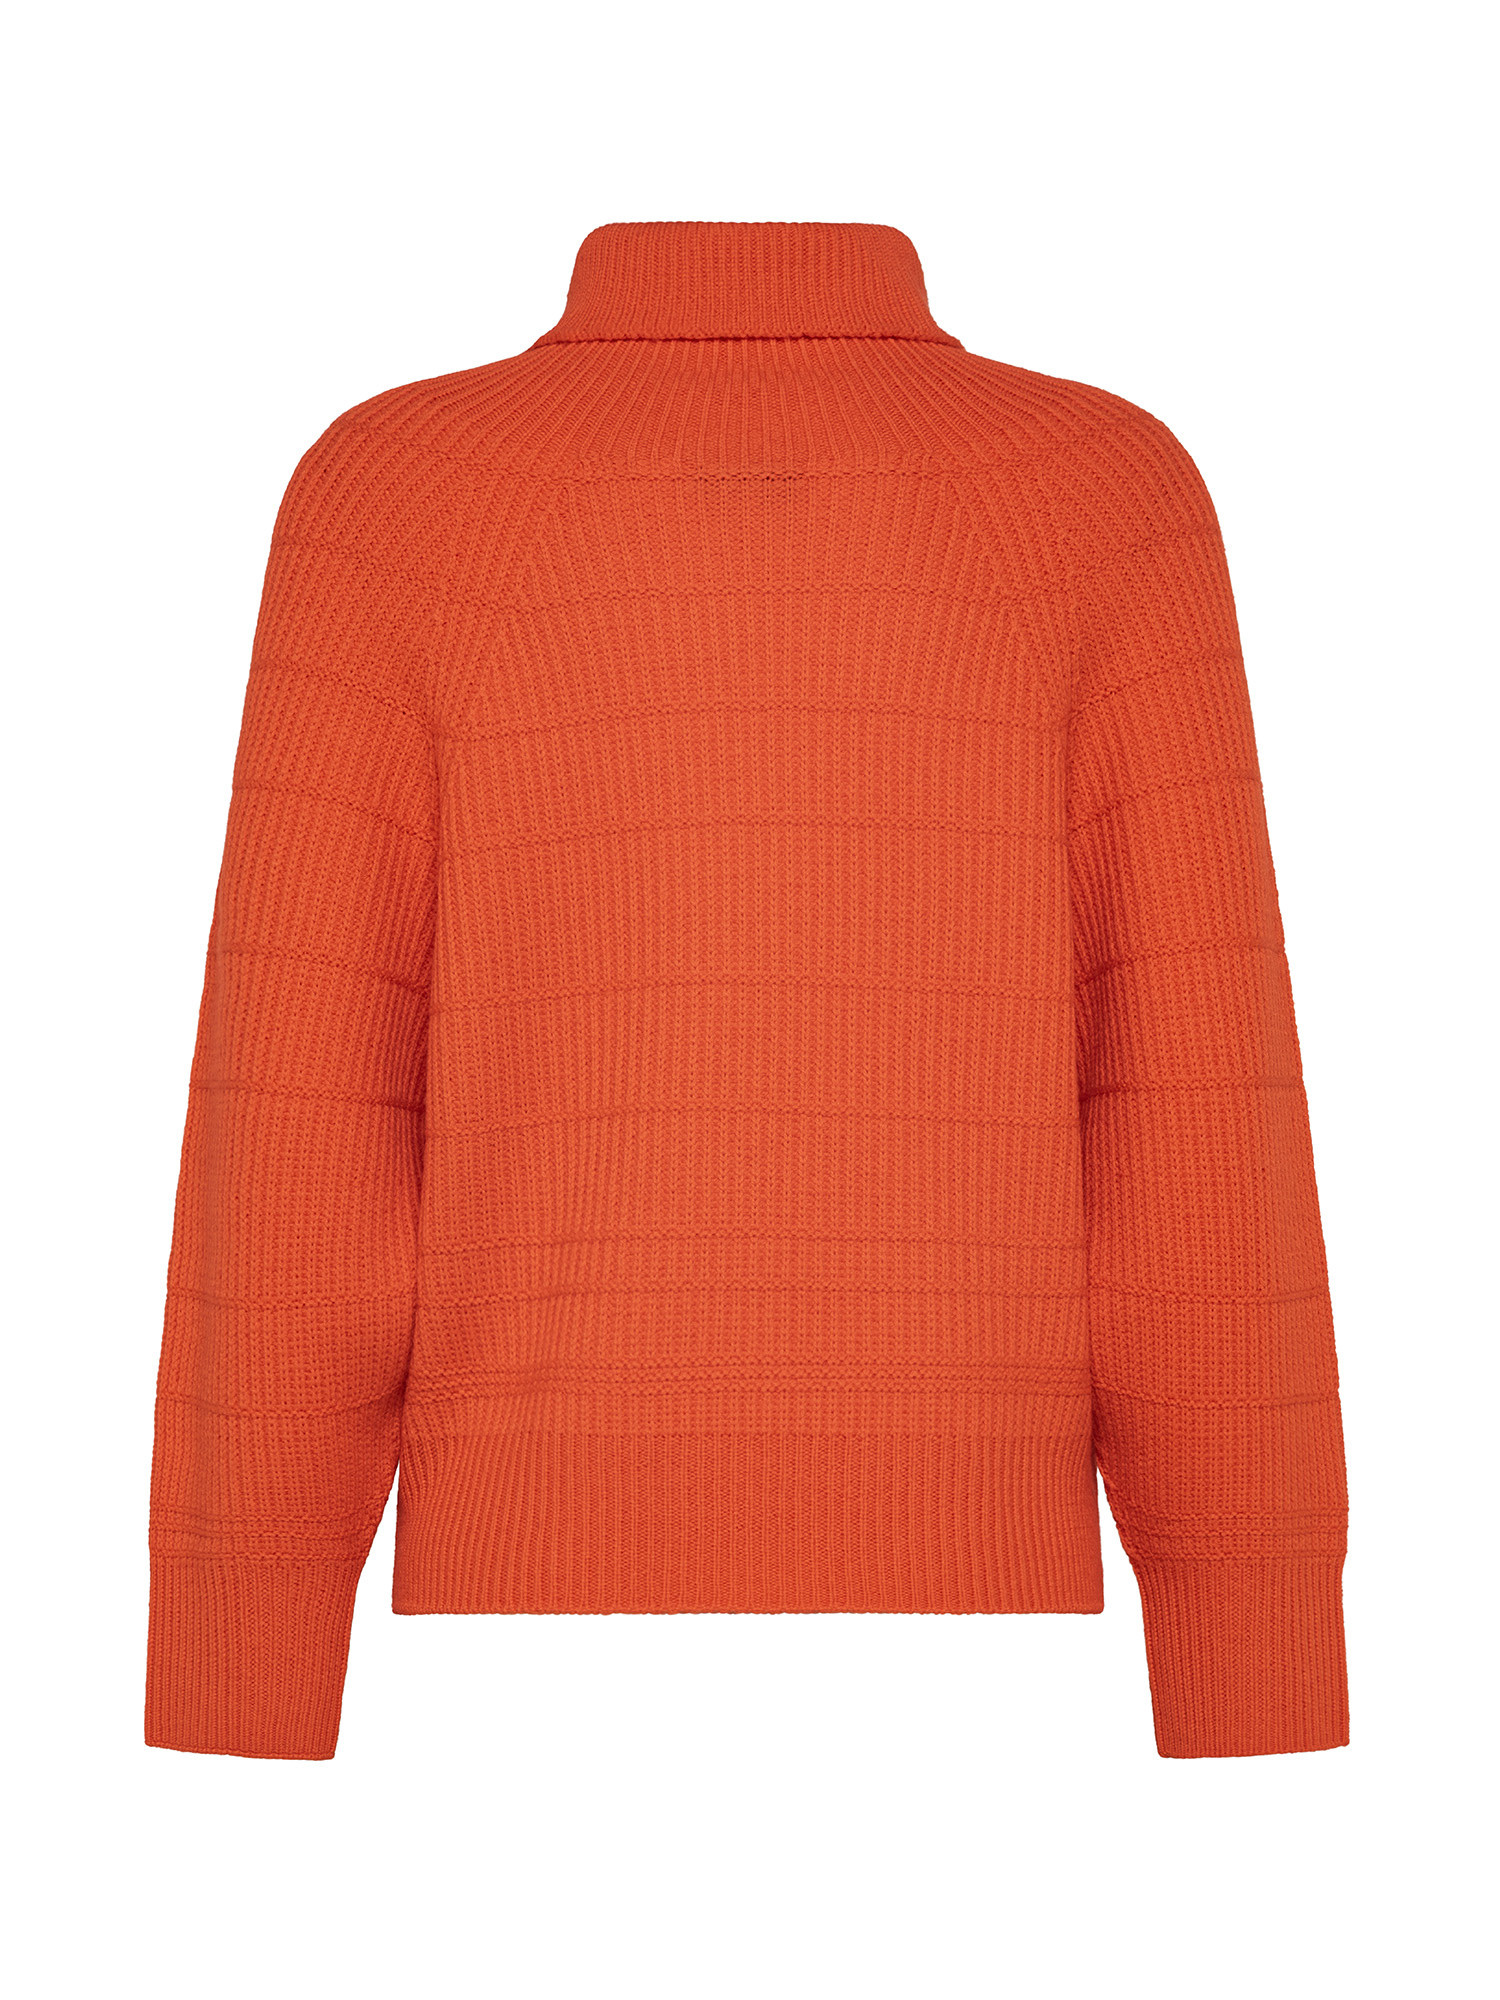 K Collection - Pullover dolcevita, Arancione, large image number 1